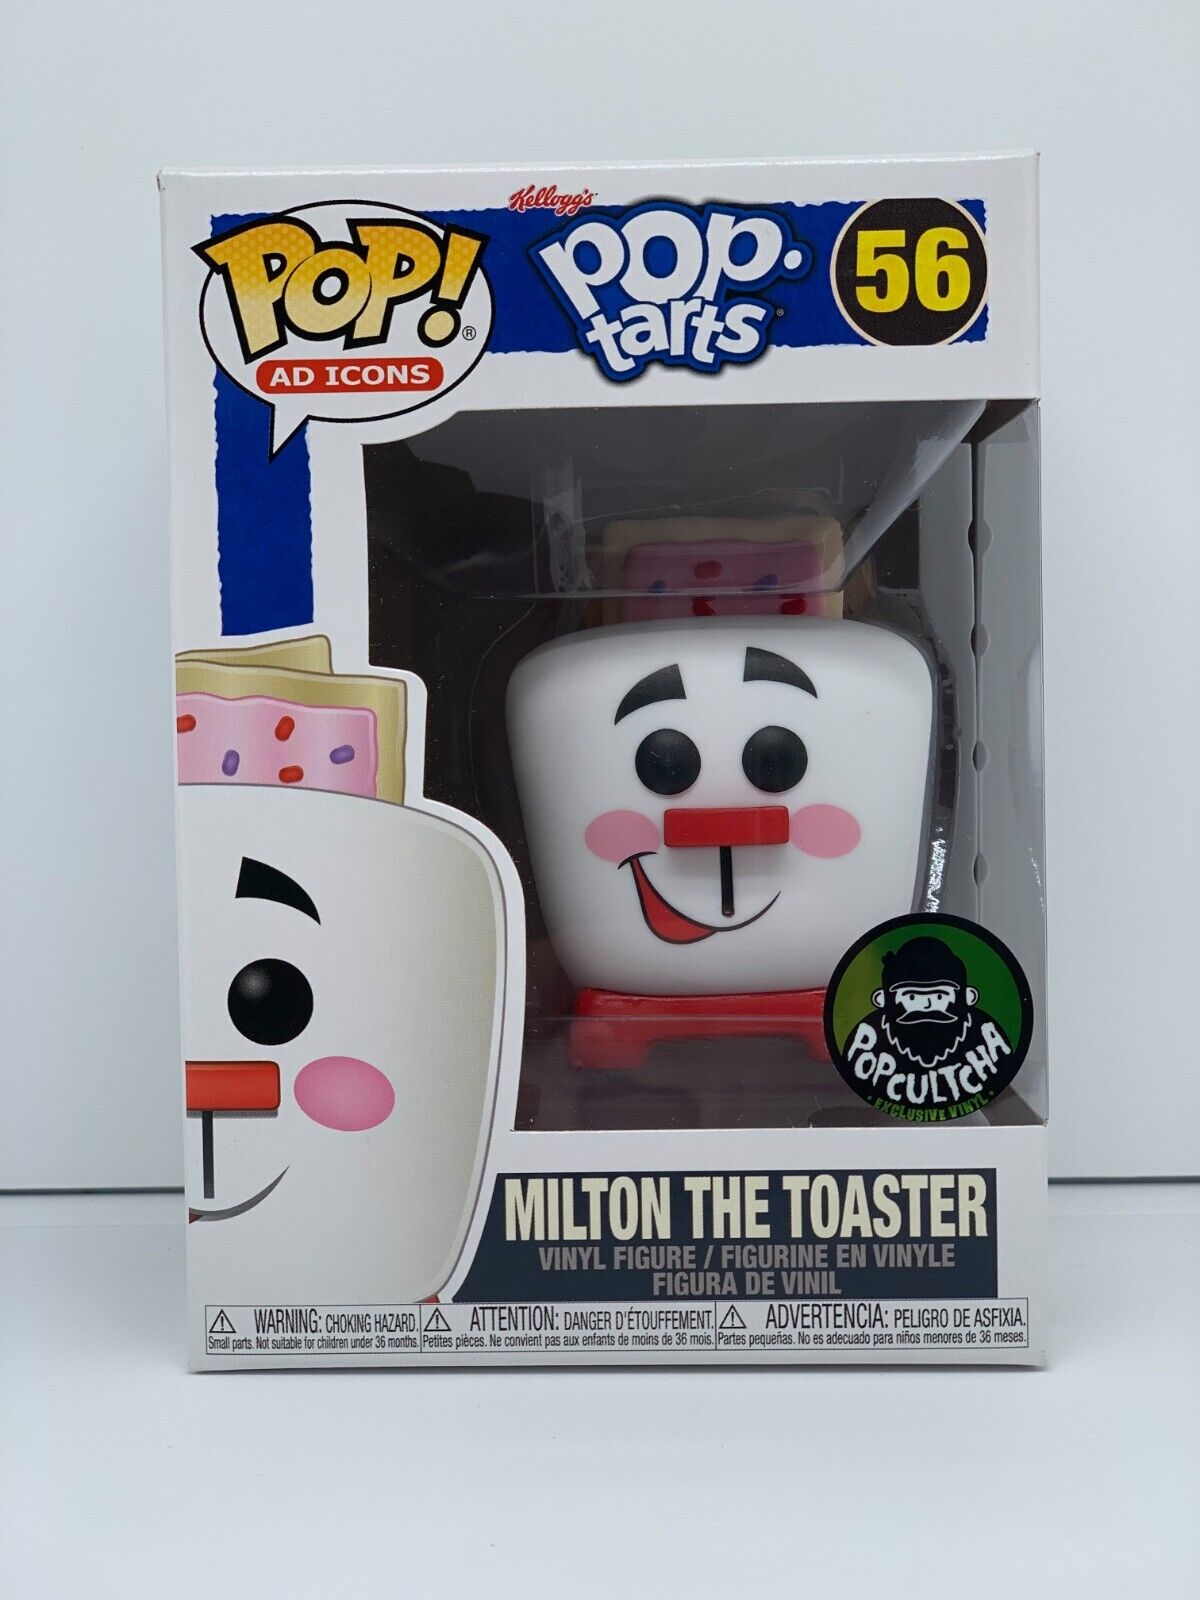 FUNKO POP AD ICONS #56 MILTON THE TOASTER POP-TARTS POPCULTCHA EXCLUSIVE VAULTED